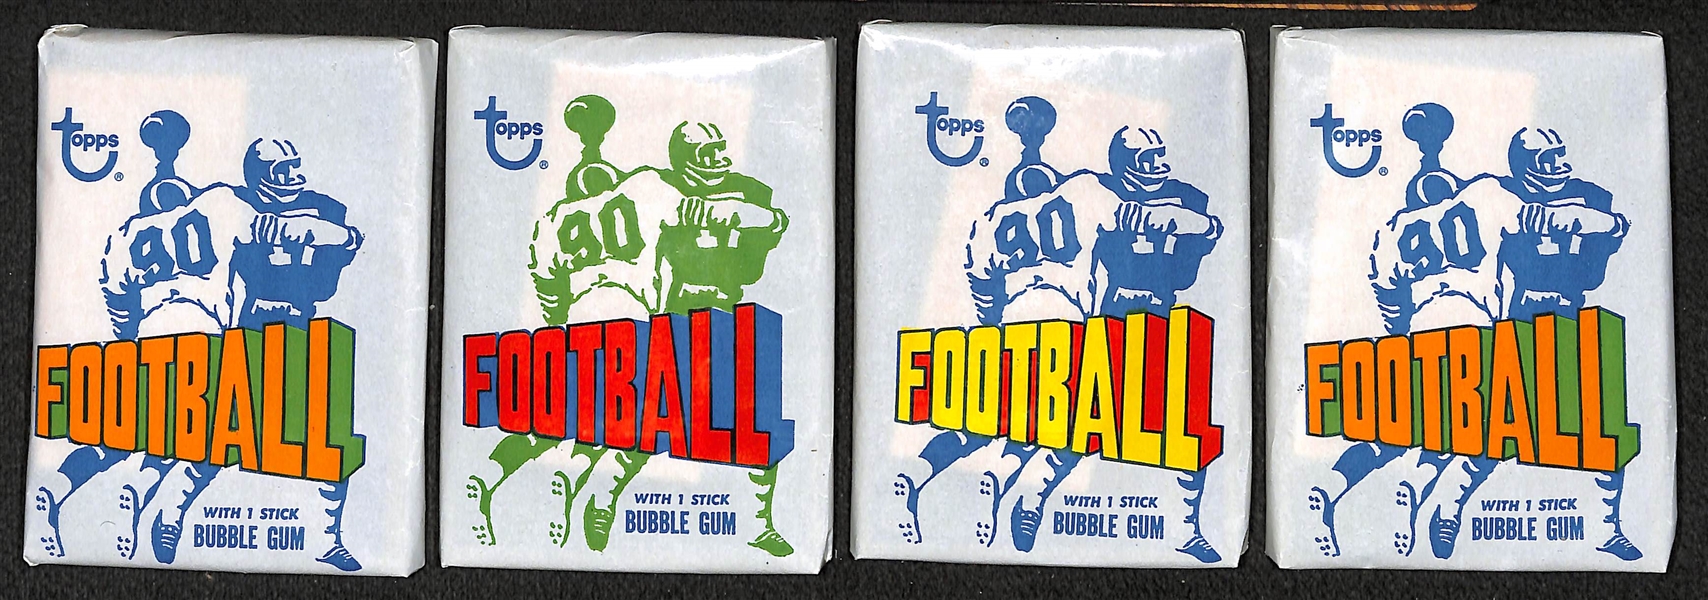 1972 Topps Football Series 2 Partially Sealed Wax Box - 11 Sealed Packs in Original Box